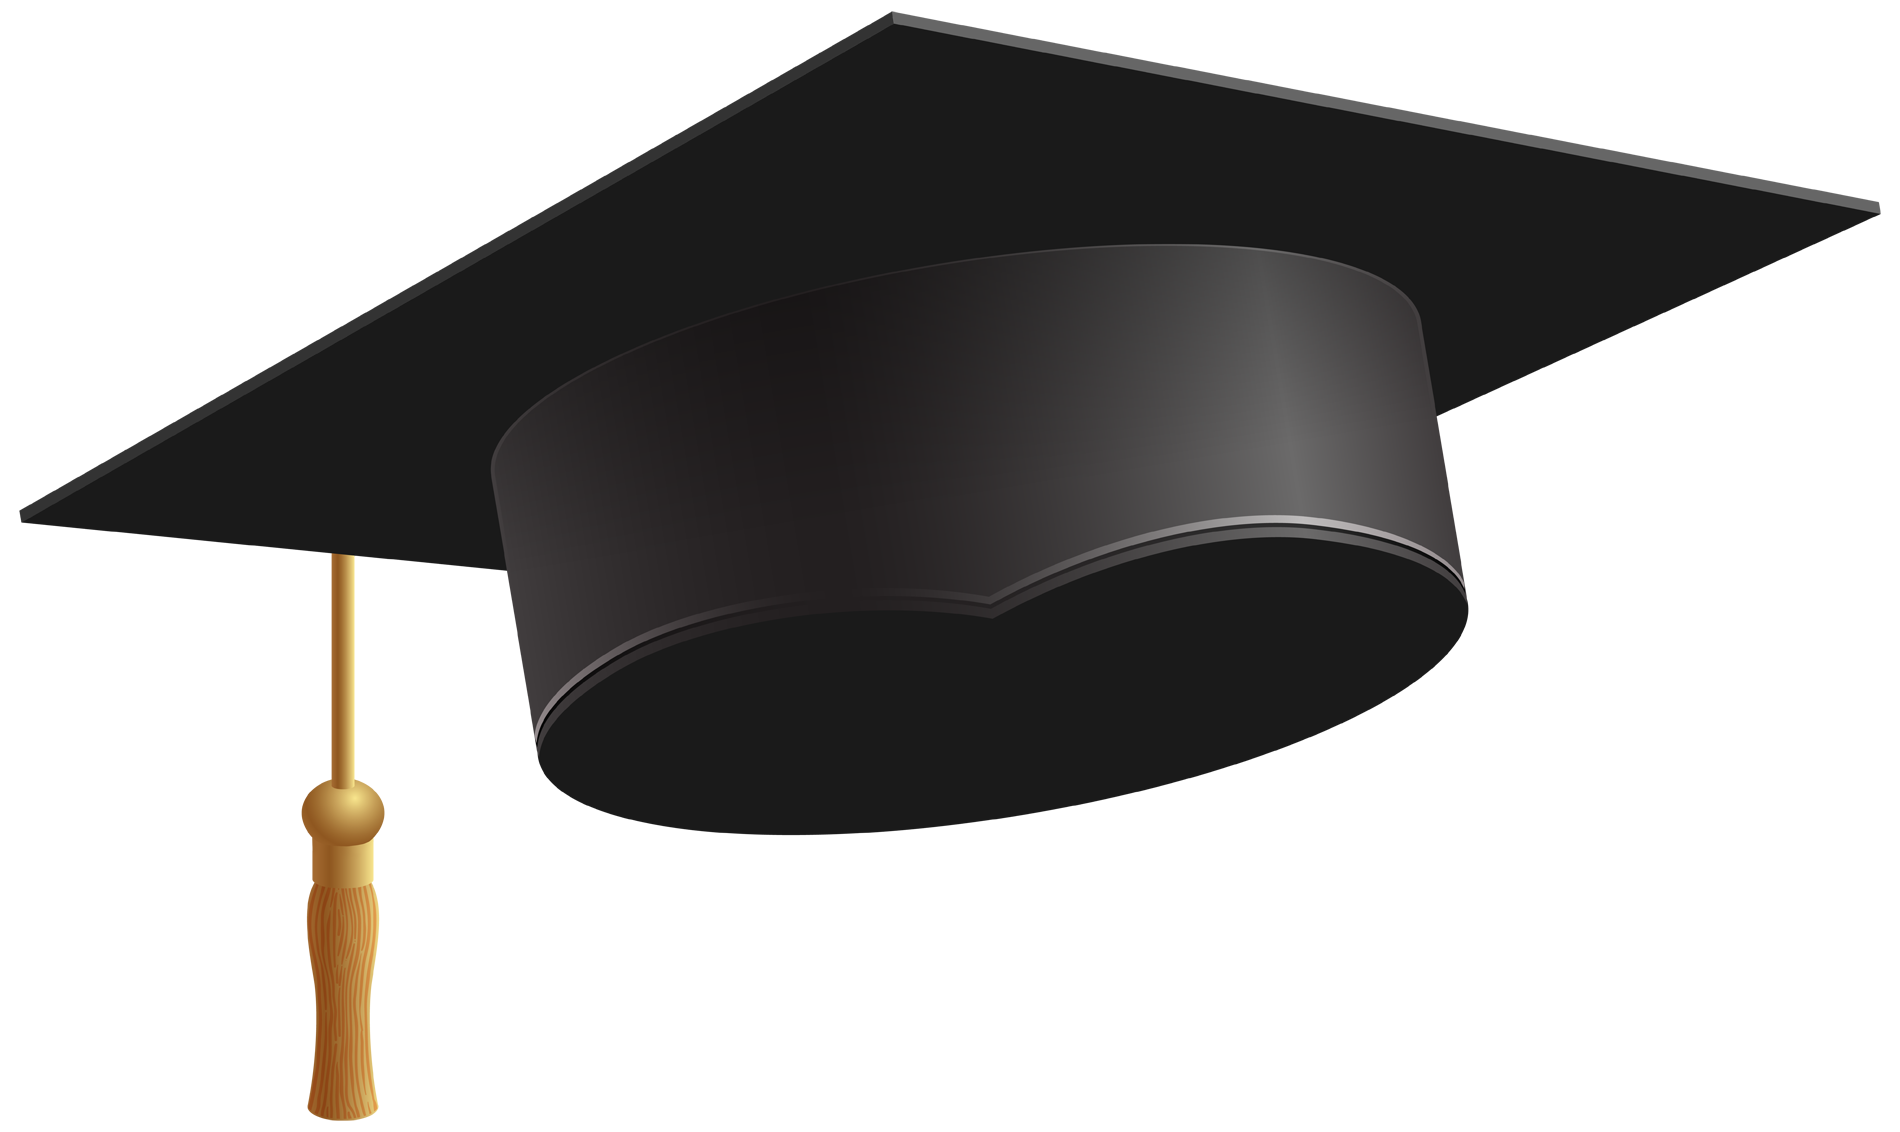 Graduation Cap Available In Different Size Png Transparent Background Free Download 45643 Freeiconspng